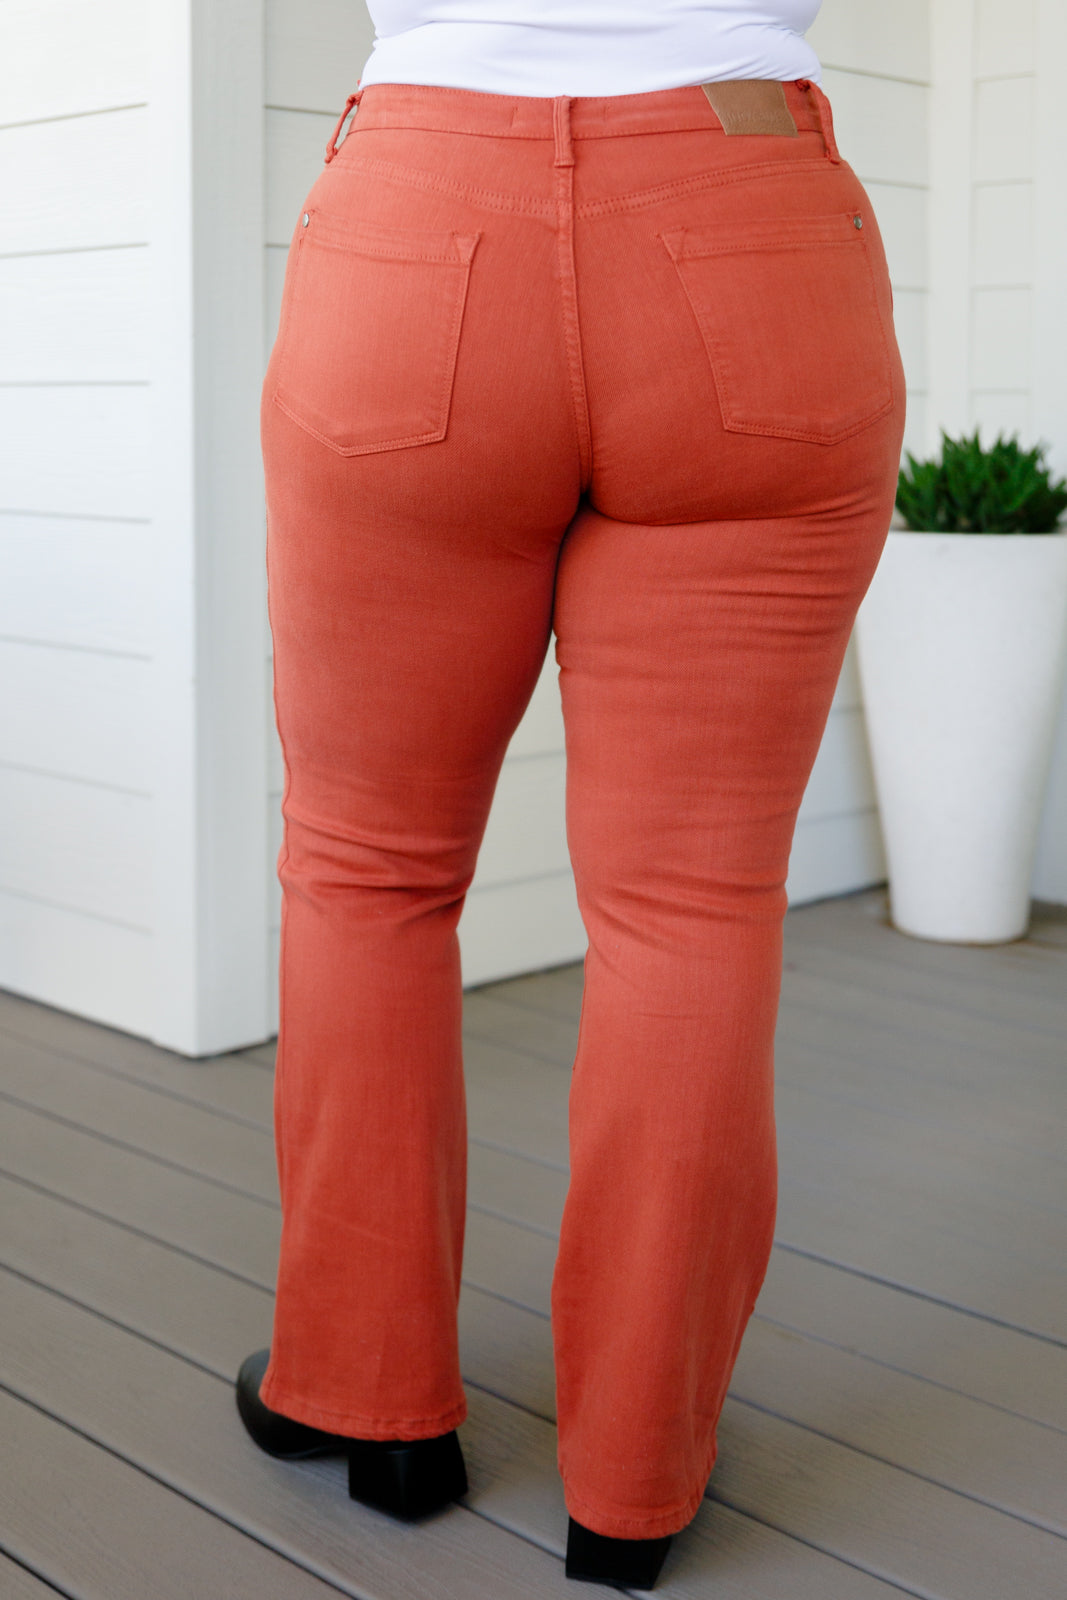 Autumn Mid Rise Slim Bootcut Jeans in Terracotta - WEBSITE EXCLUSIVE